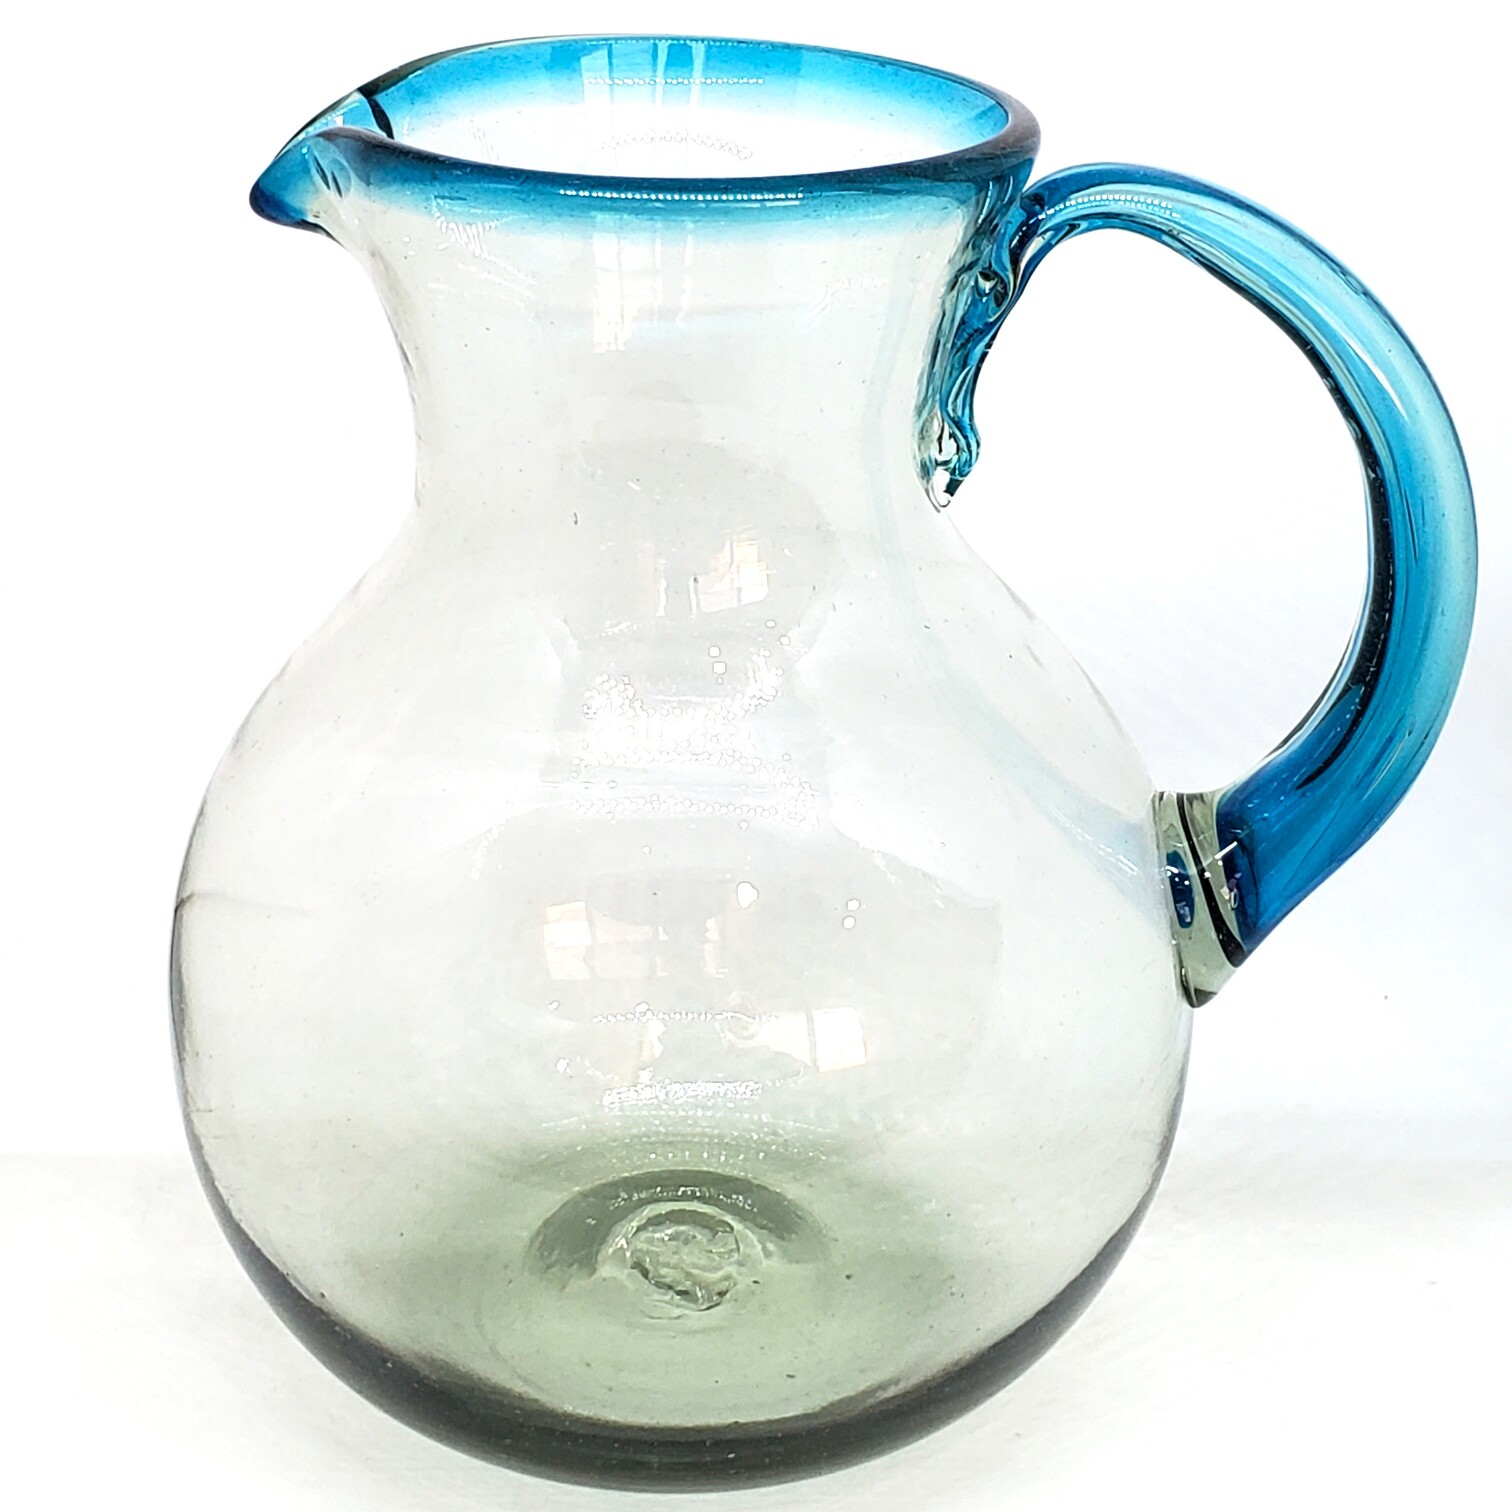 New Items / Aqua Blue Rim 120 oz Large Bola Pitcher / This modern pitcher is decorated with an aqua blue rim.